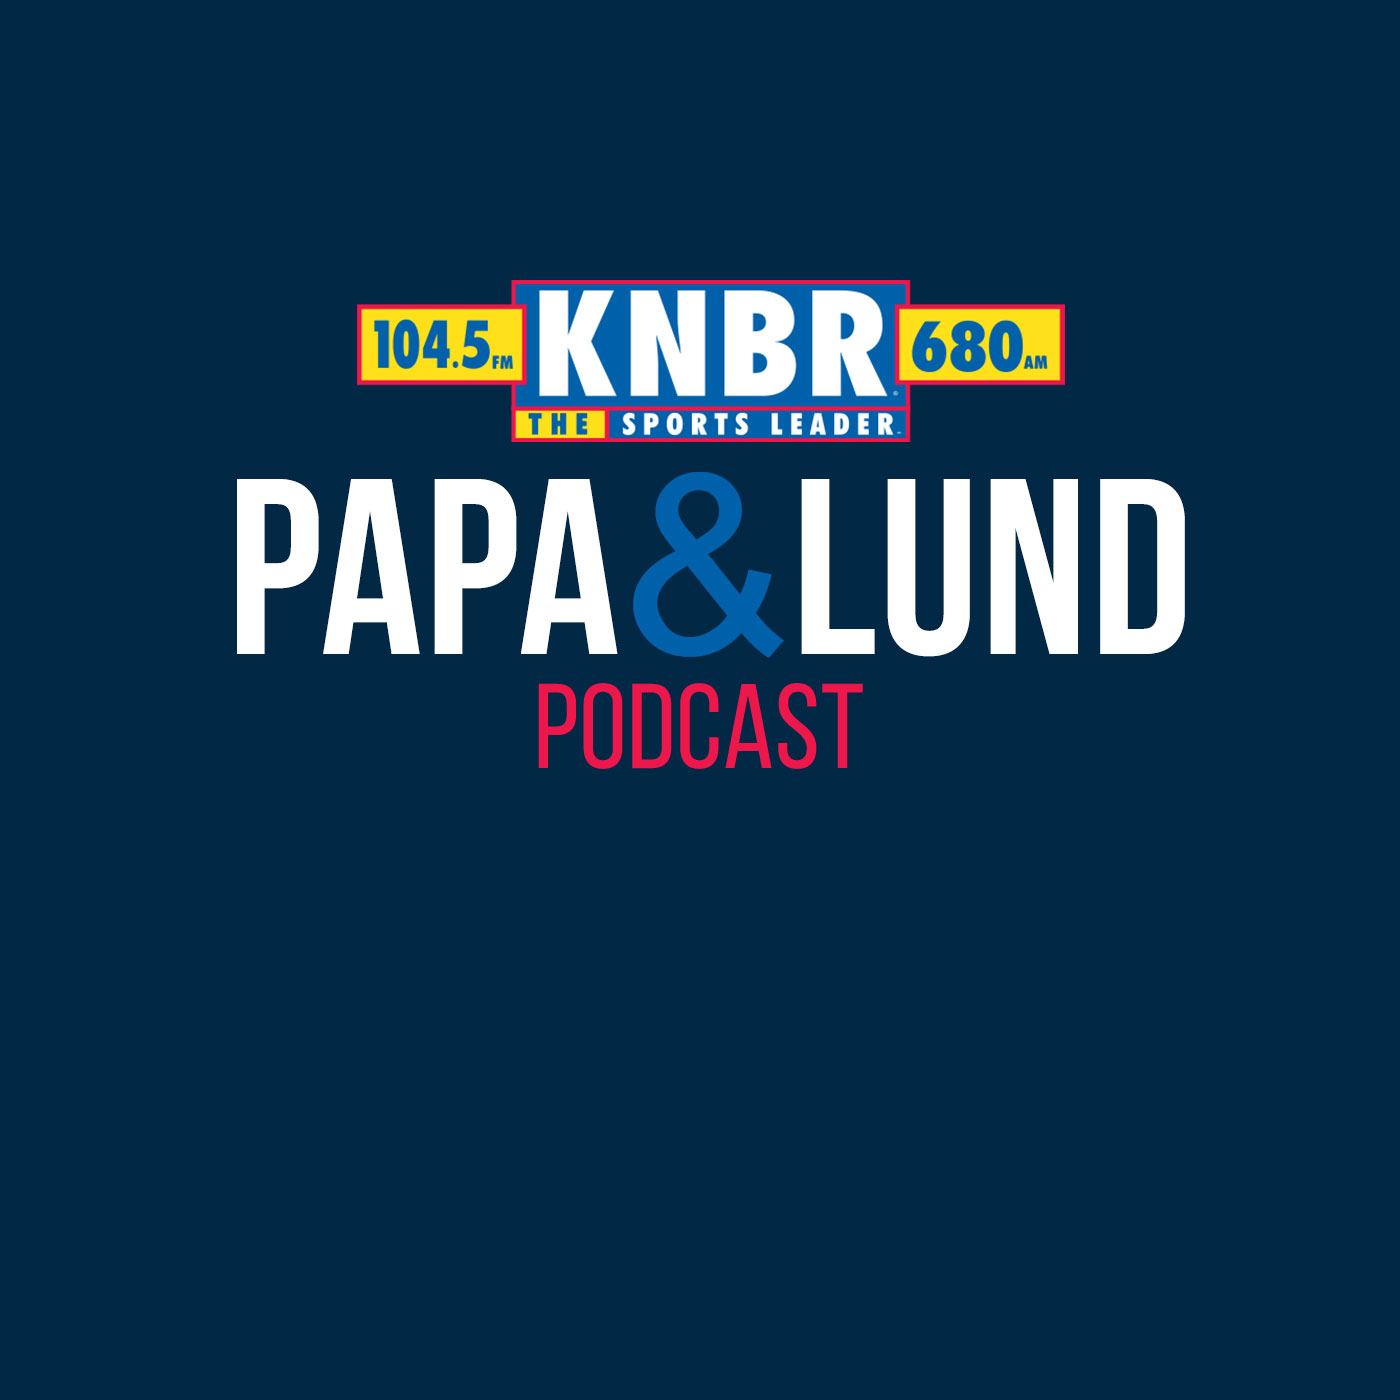 6-22 George Kontos joins Papa & Lund to discuss the Giants 10 game winning streak as well as the key component of the streak being the Bullpen dominance